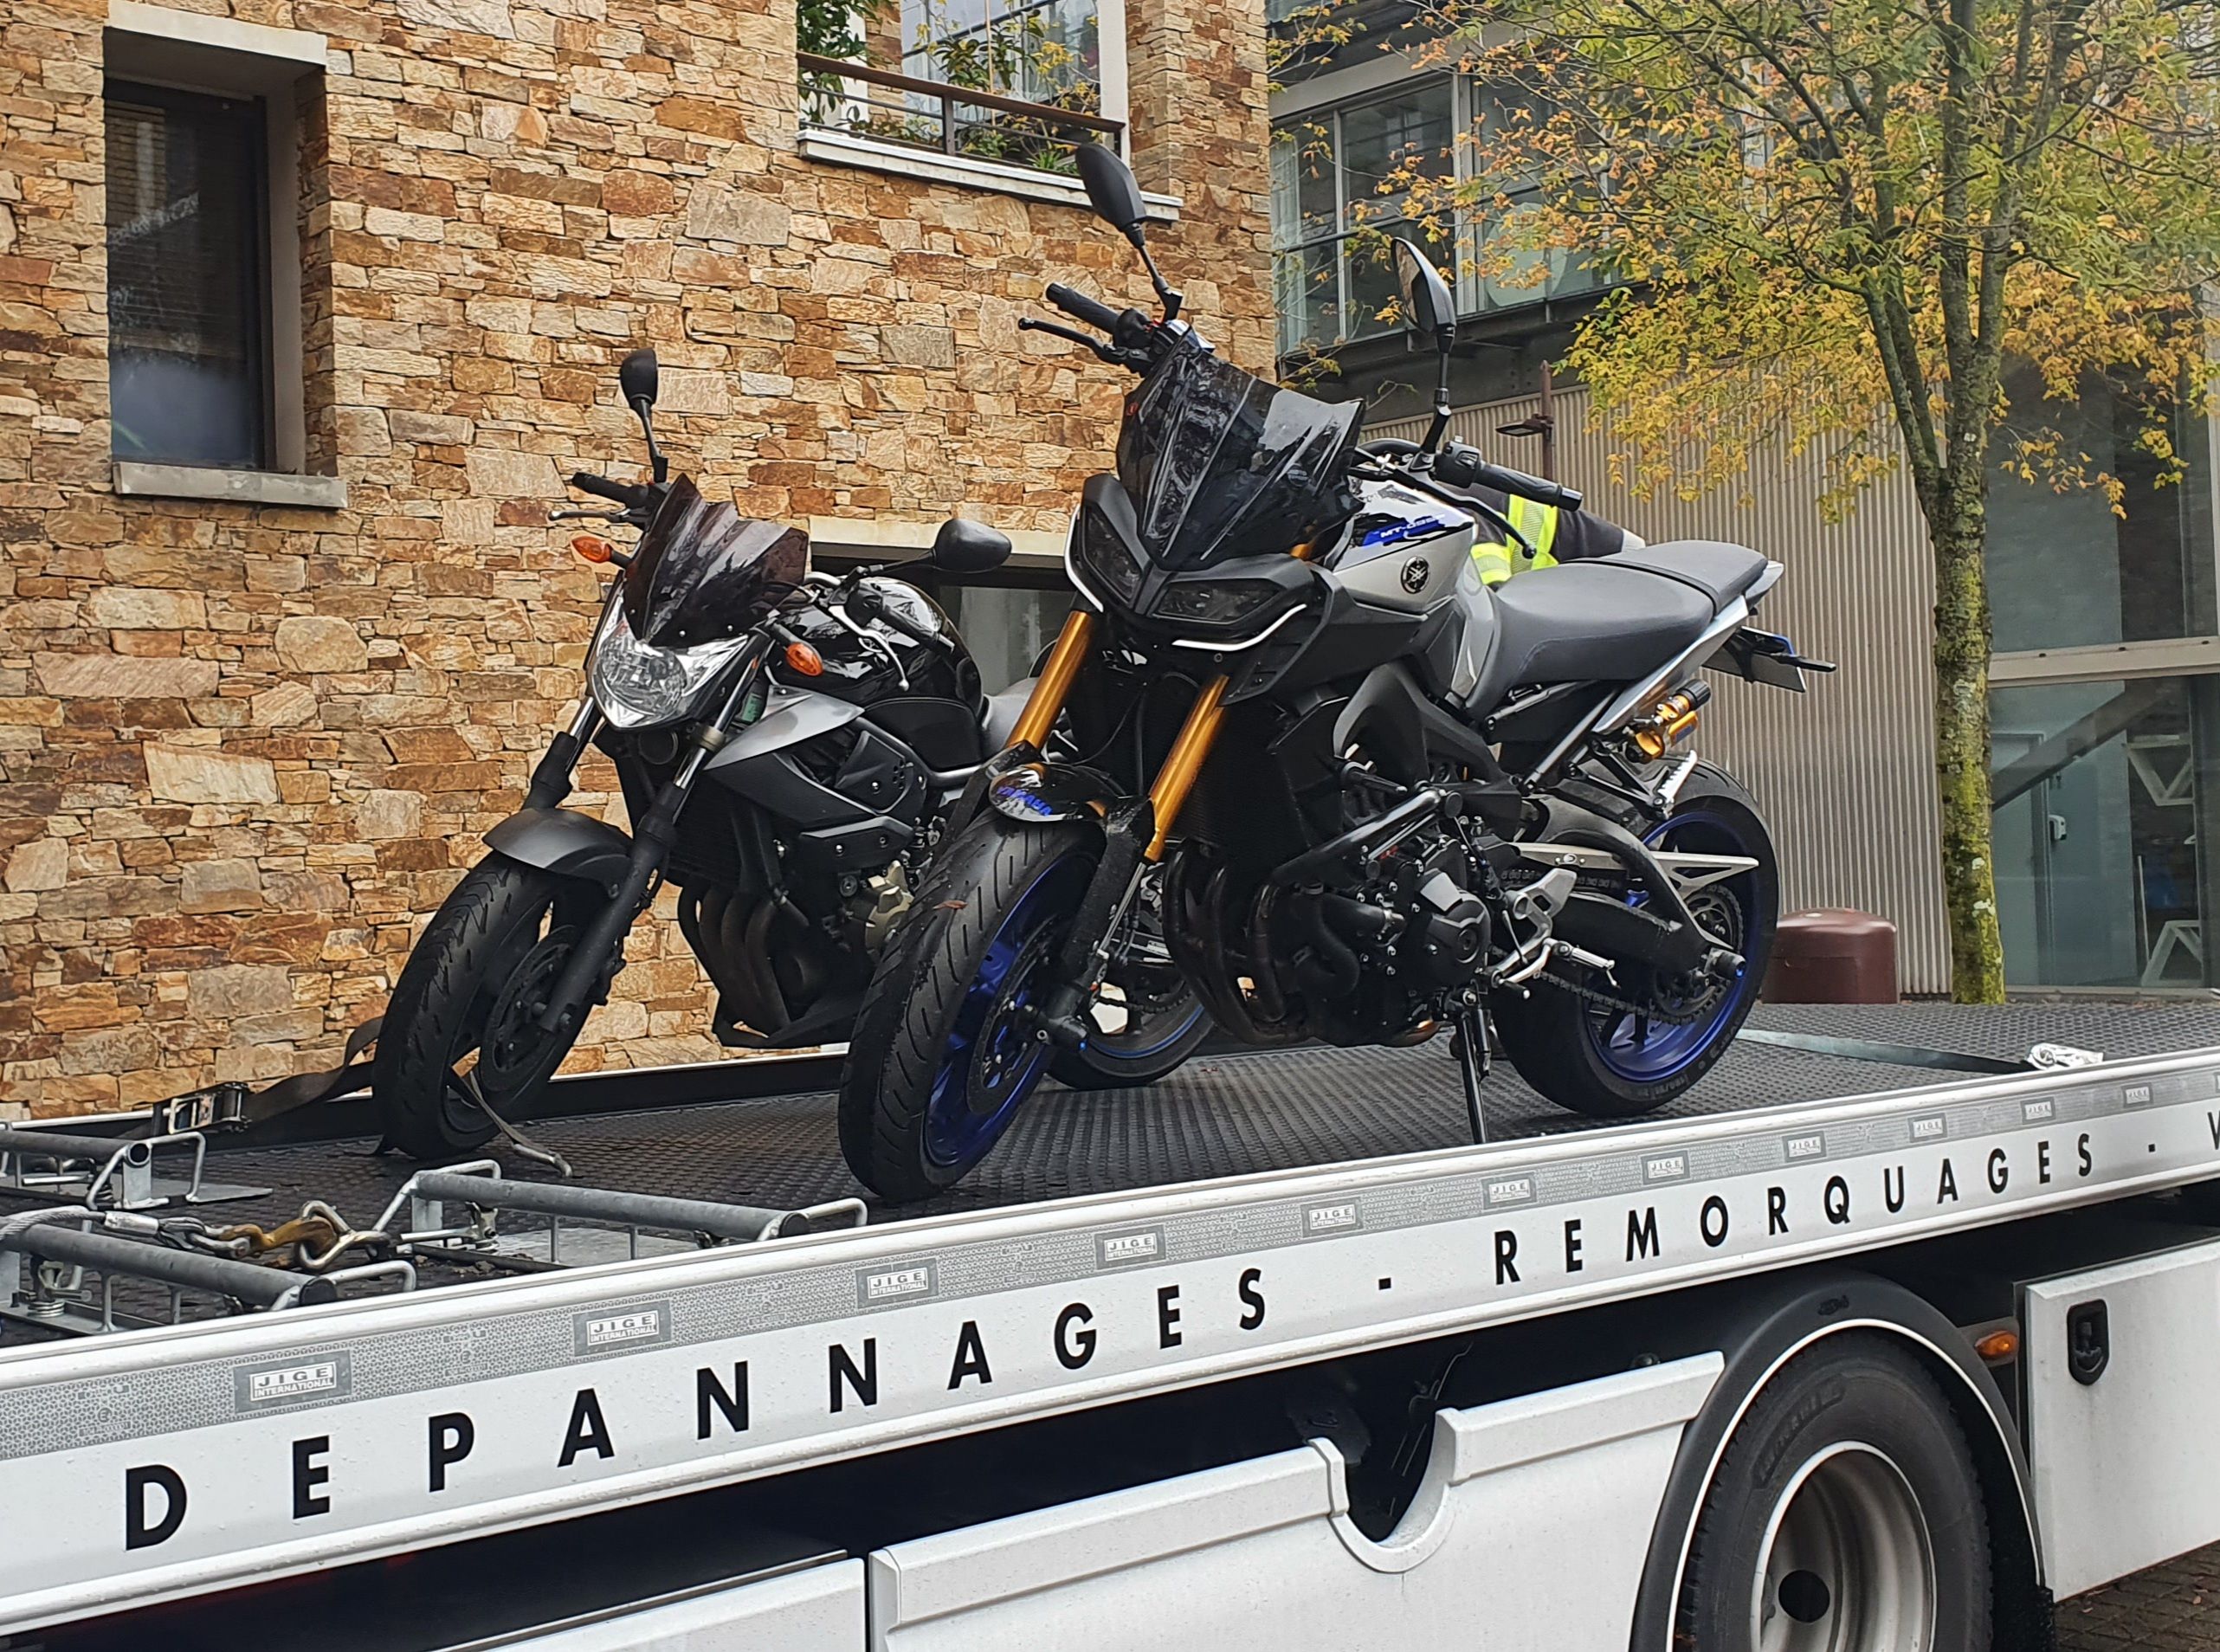 Pegase Moto prevented the theft of its two motorbikes